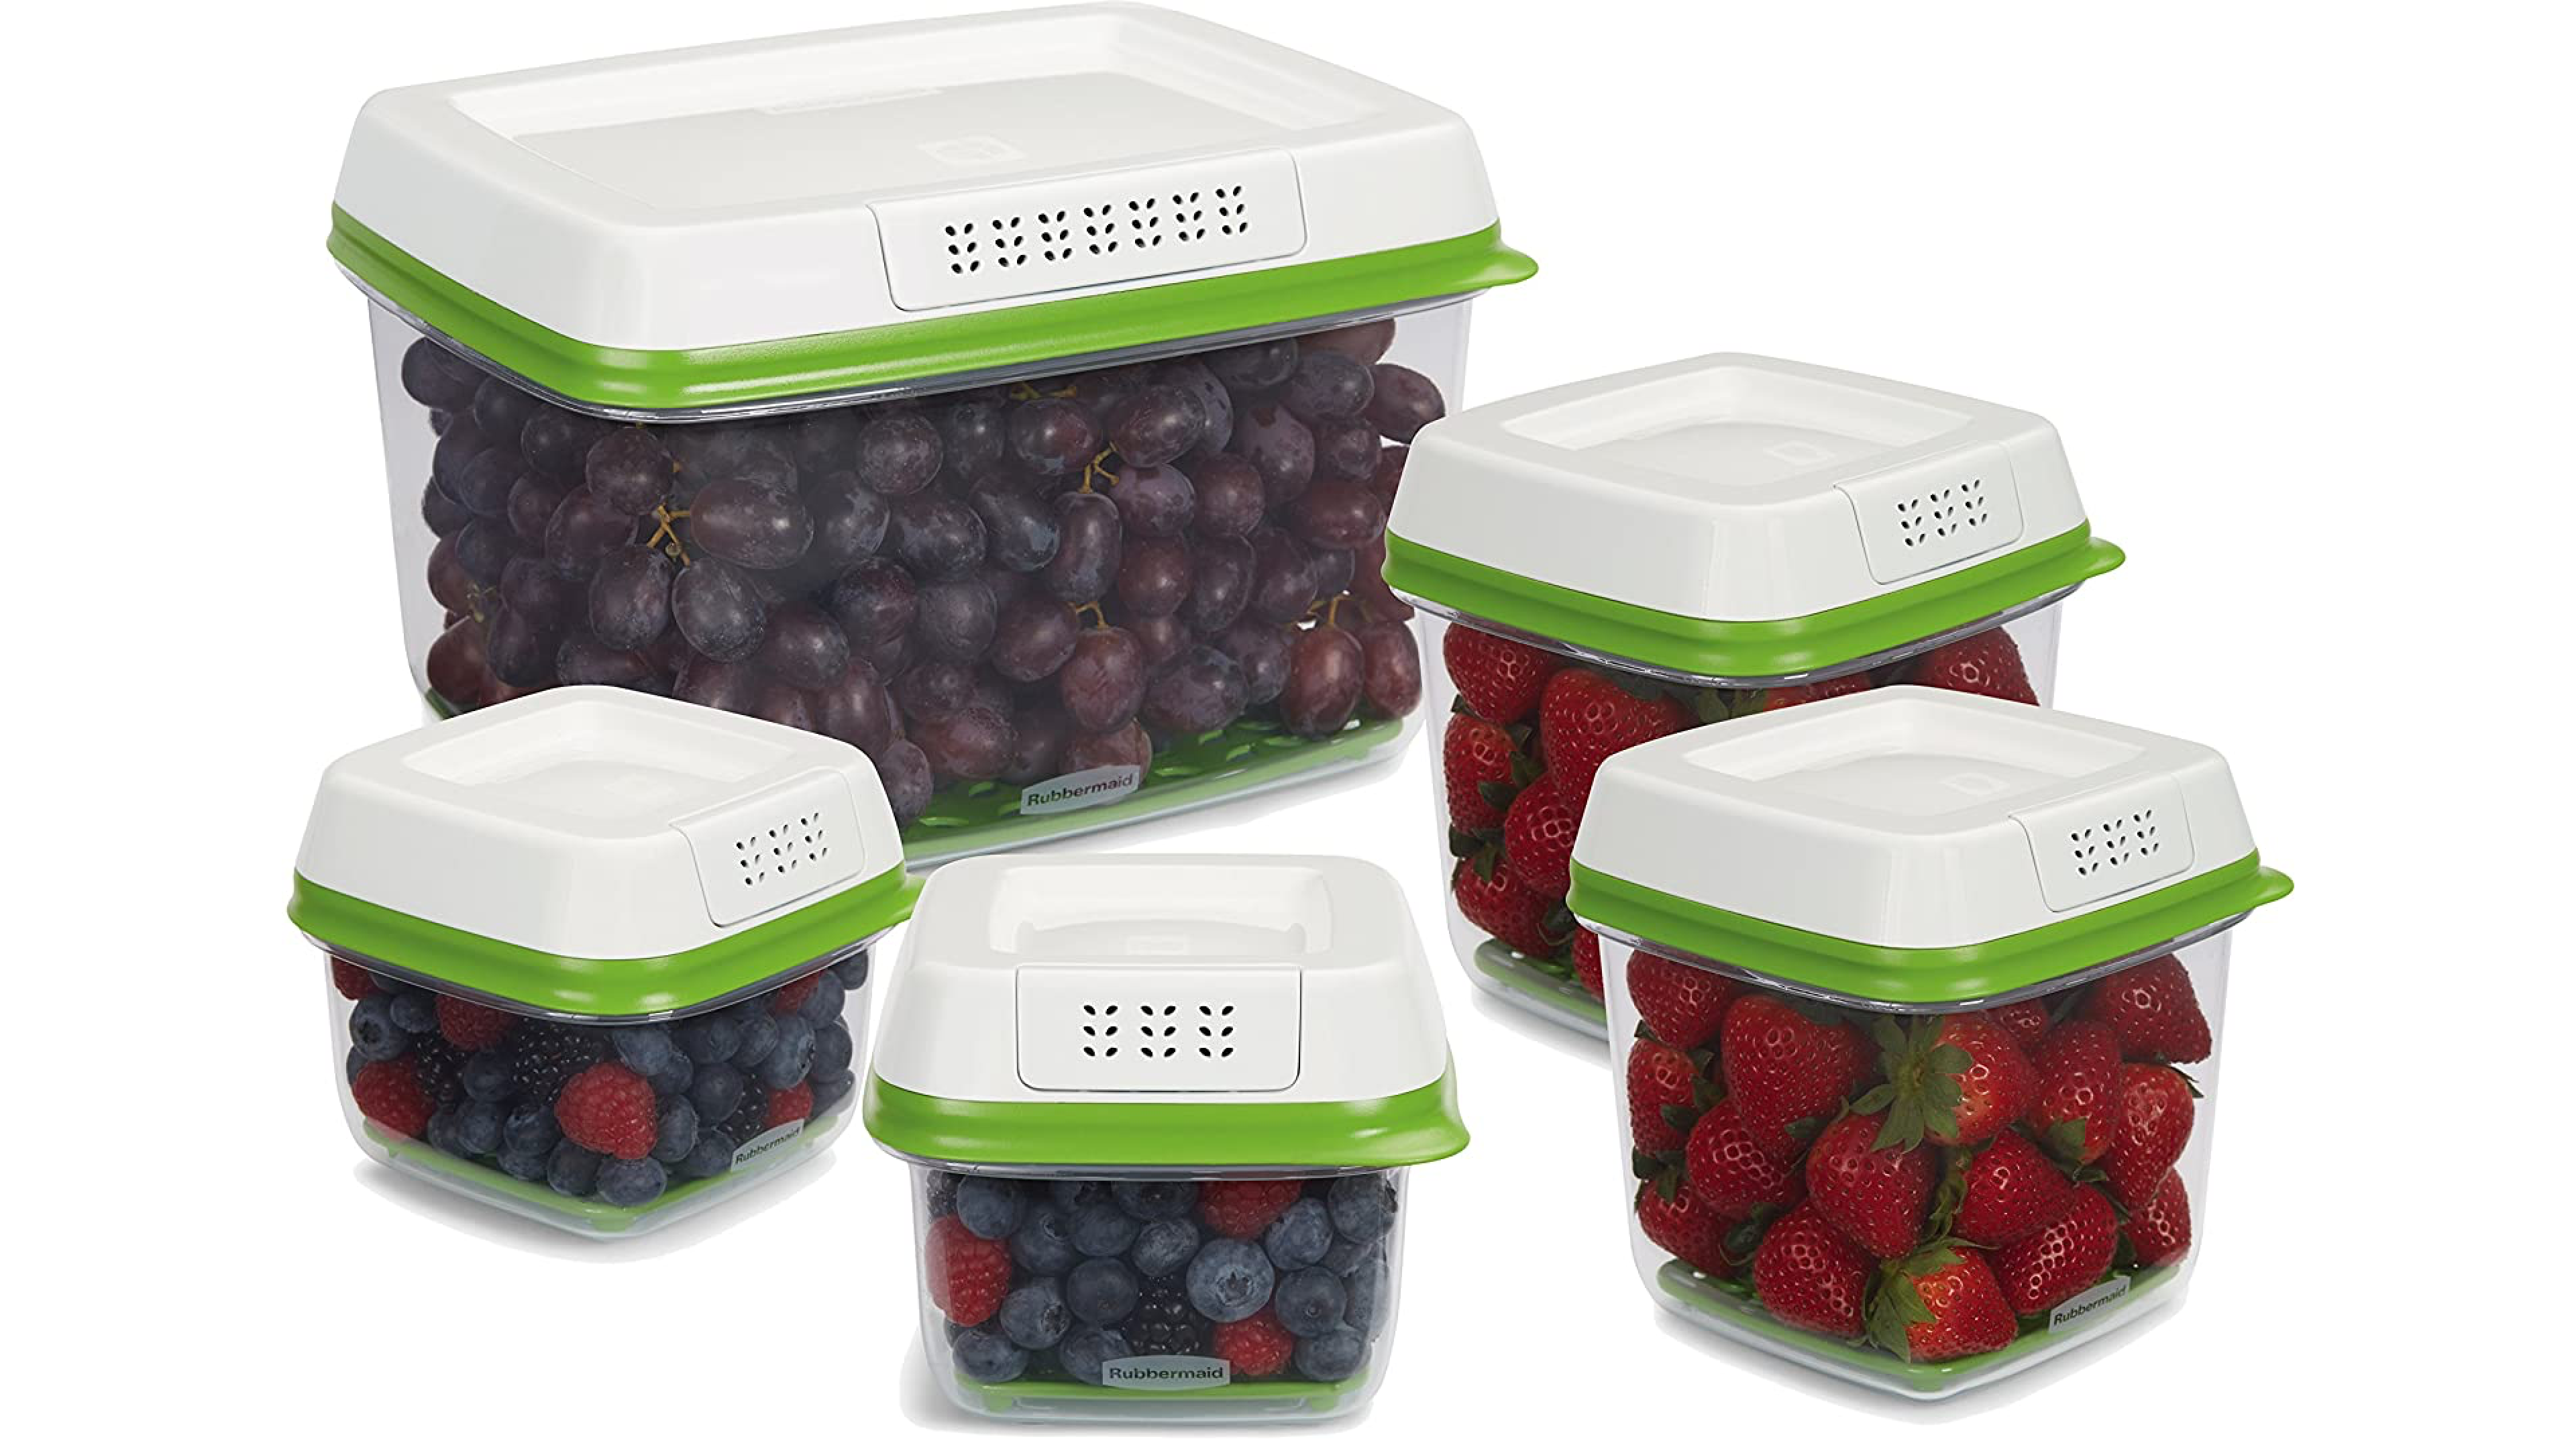 produce savers that regulate air flow and keep fruit and veggies fresh for longer